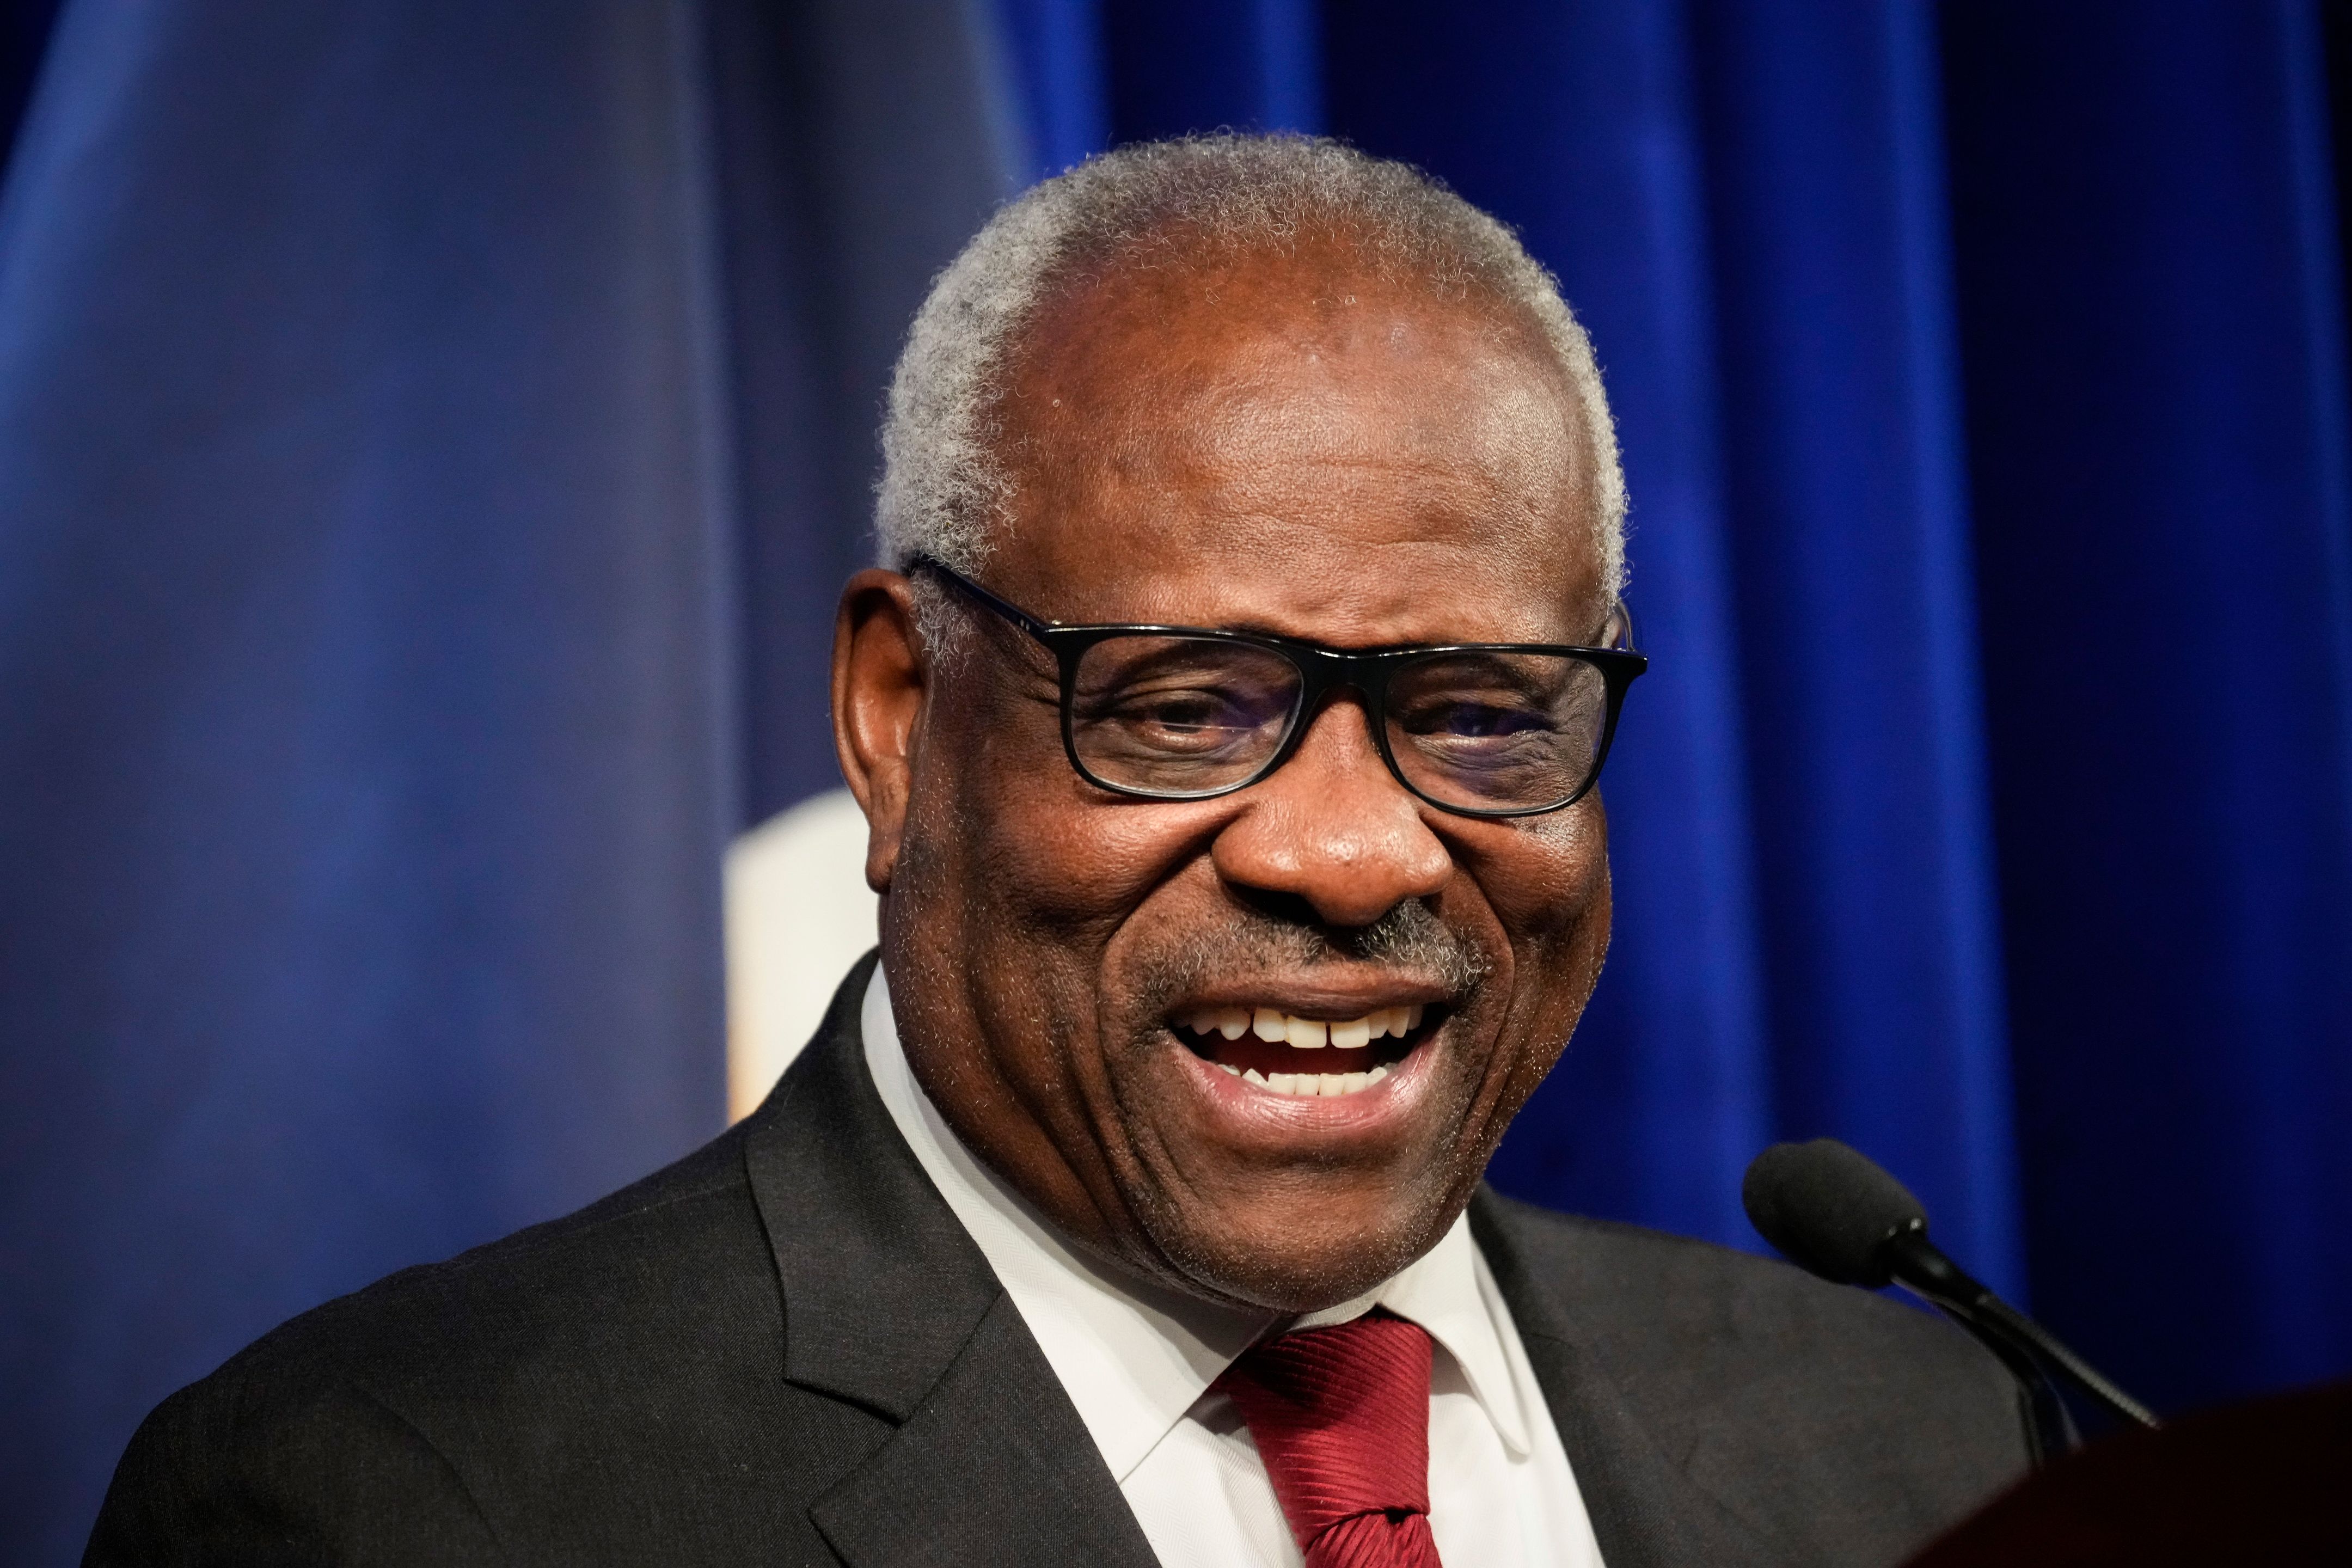 It was just awful': The Clarence Thomas hearings, in the words of those who  were there - The Washington Post